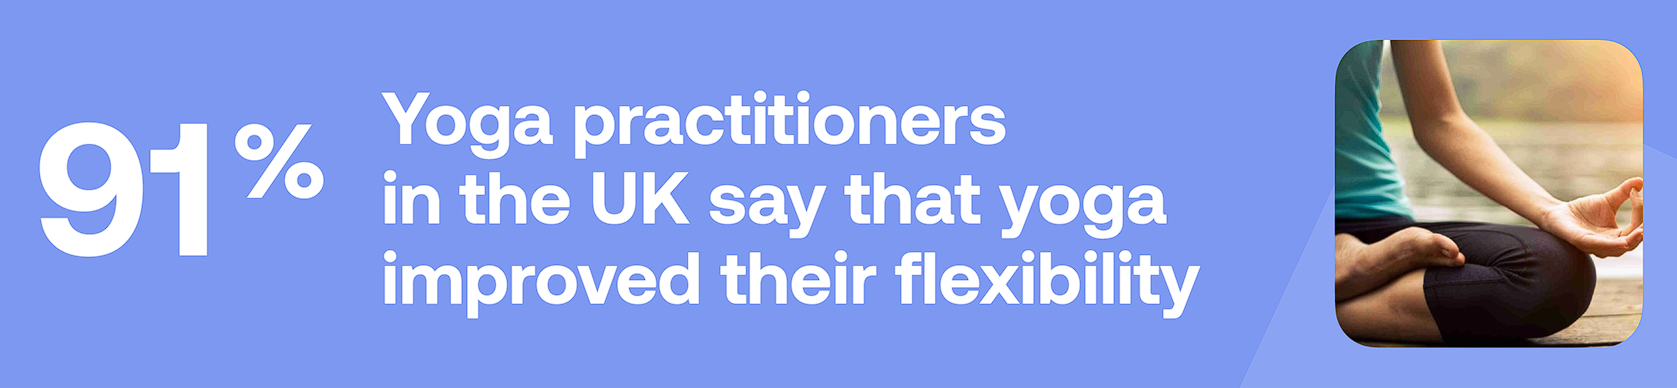 91% Yoga practitioners in the UK say thet yoga improve their fkexibility